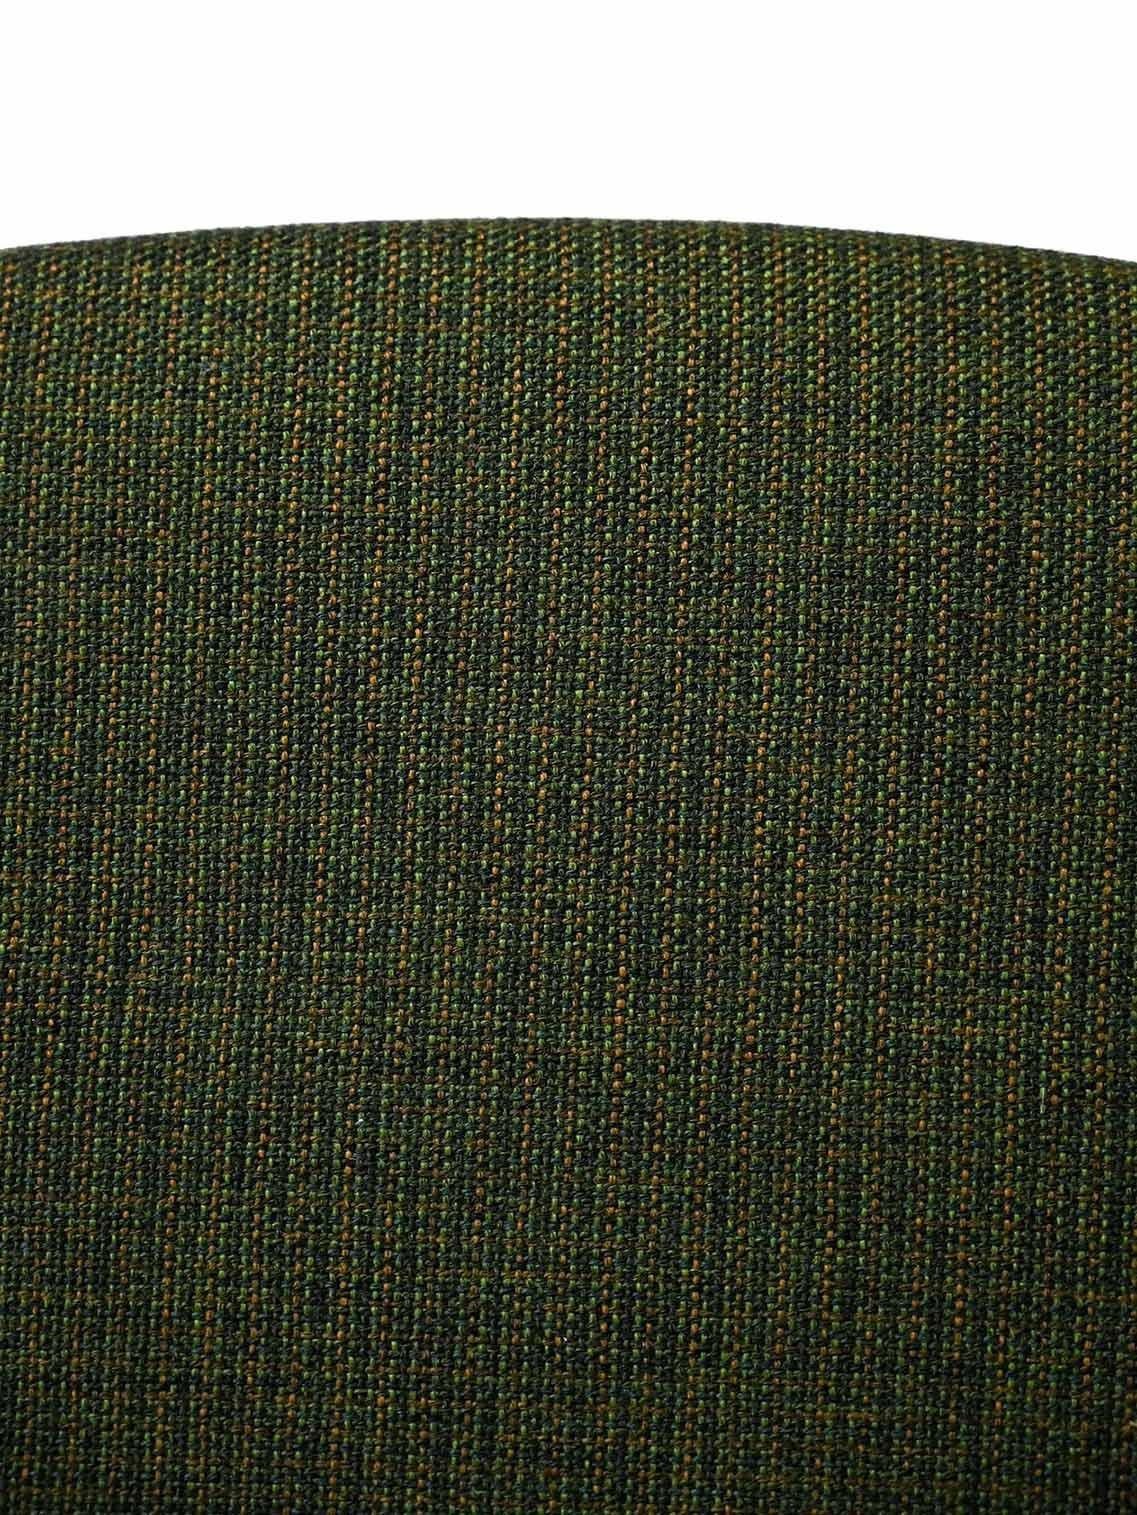 Mid-20th Century 1960s Chairs with Green Fabric